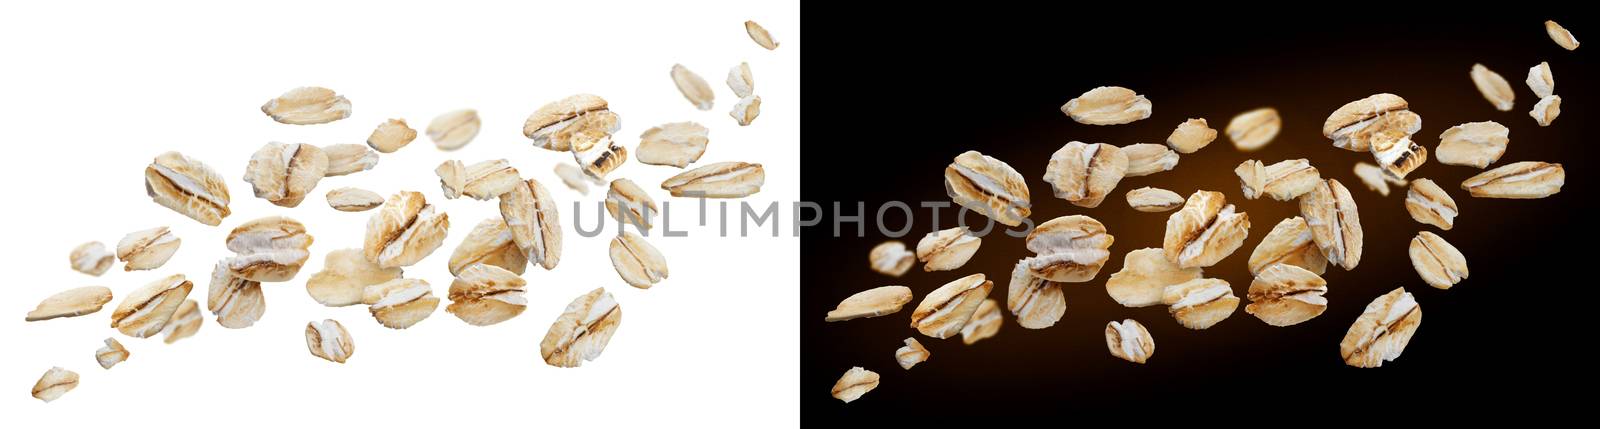 Oat flakes isolated on white and black backgrounds. Falling oats